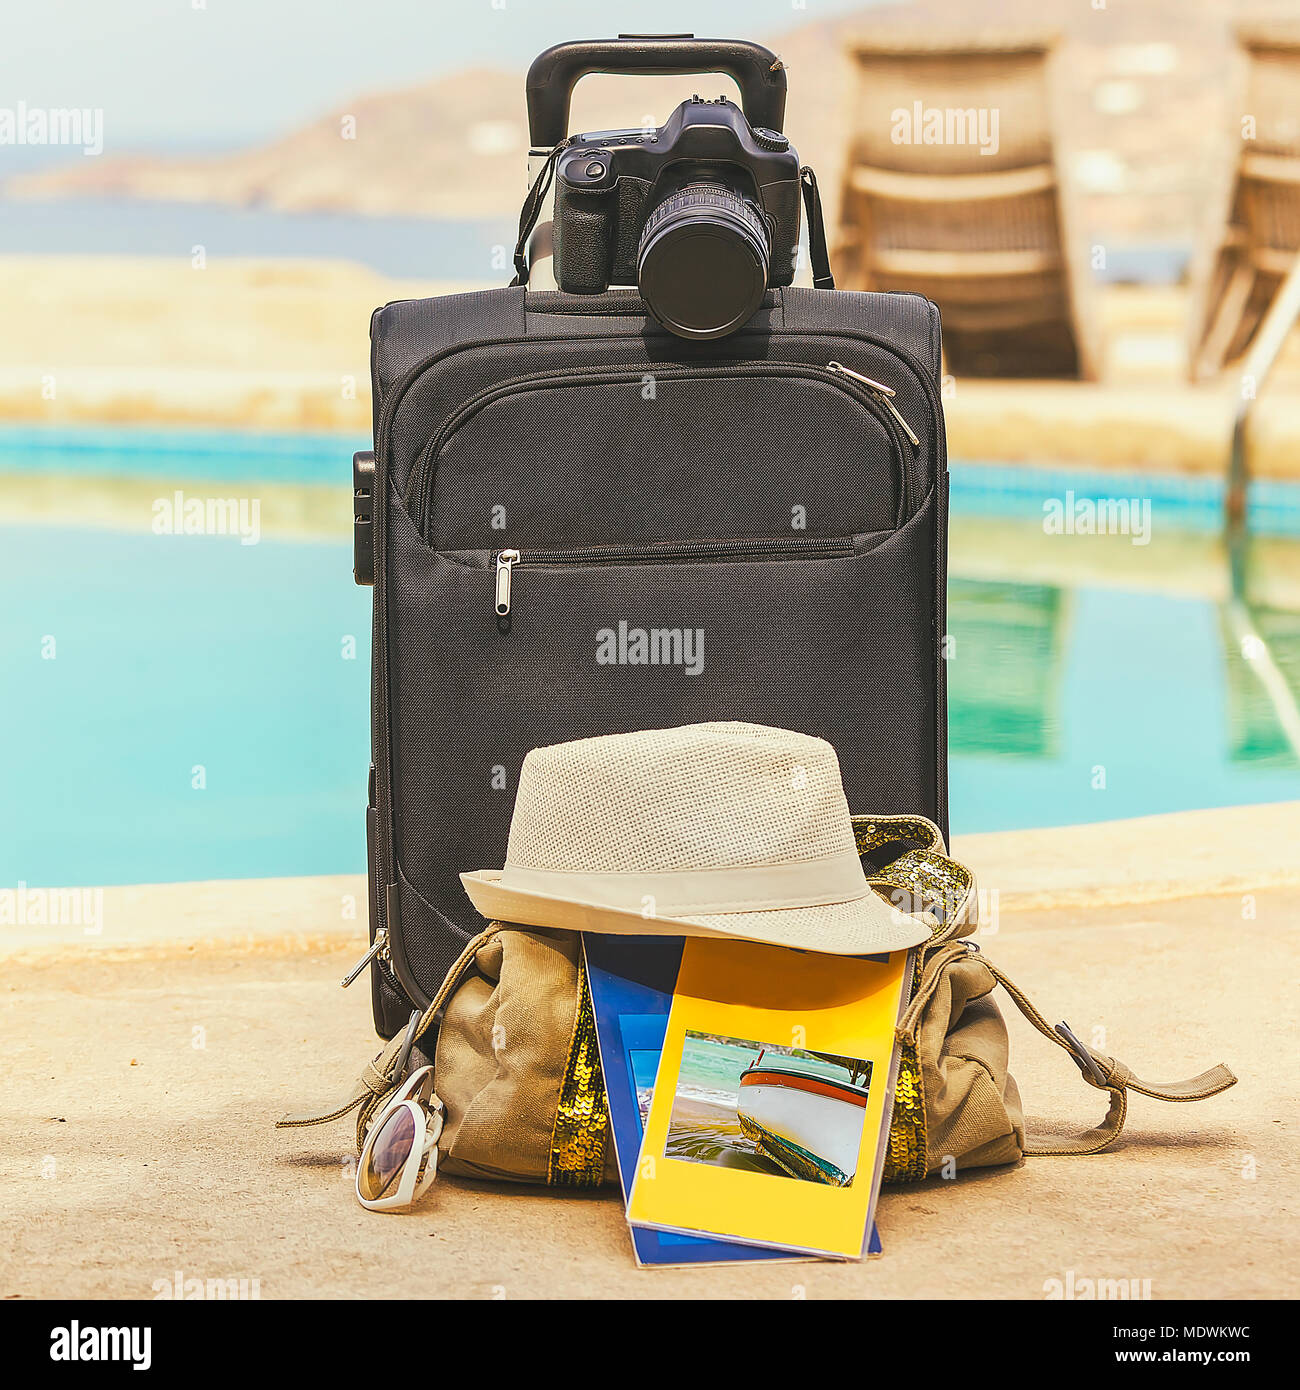 Arrival at holiday destination with black suitcase and dslr. Background swimming pool. Stock Image. Stock Photo